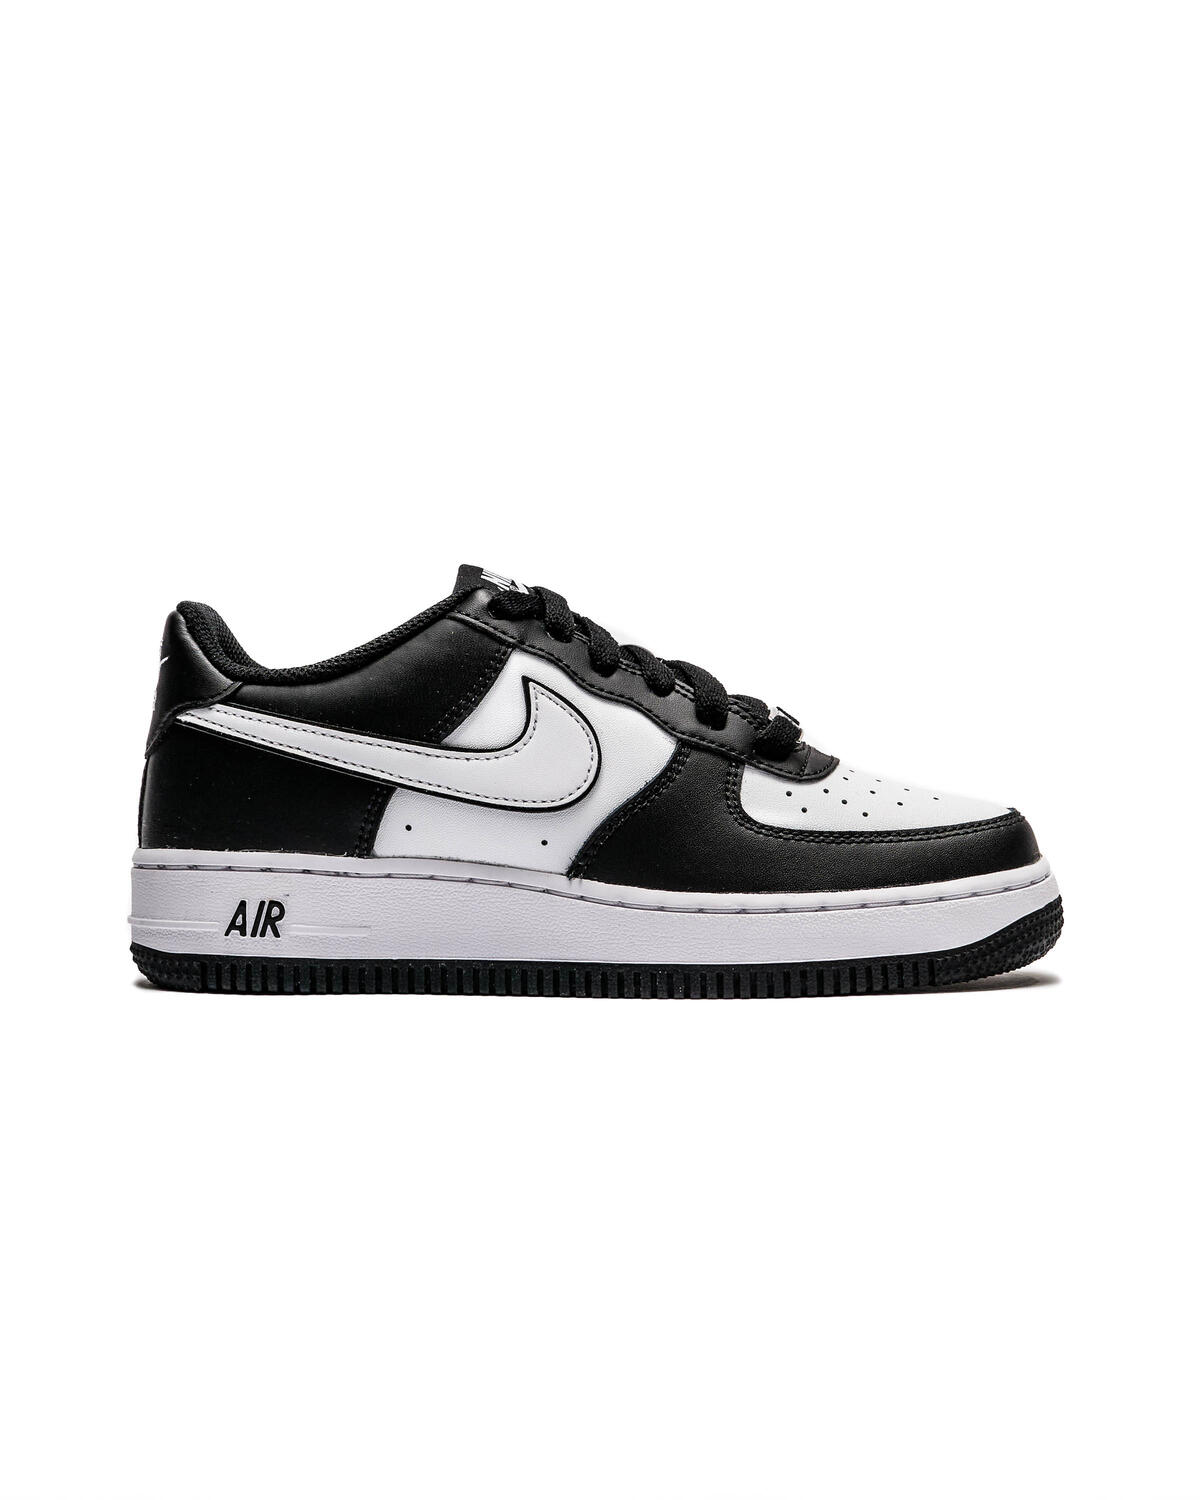 Nike Air Force 1 LV8 GS Boy's Sneakers - White/White, US 4